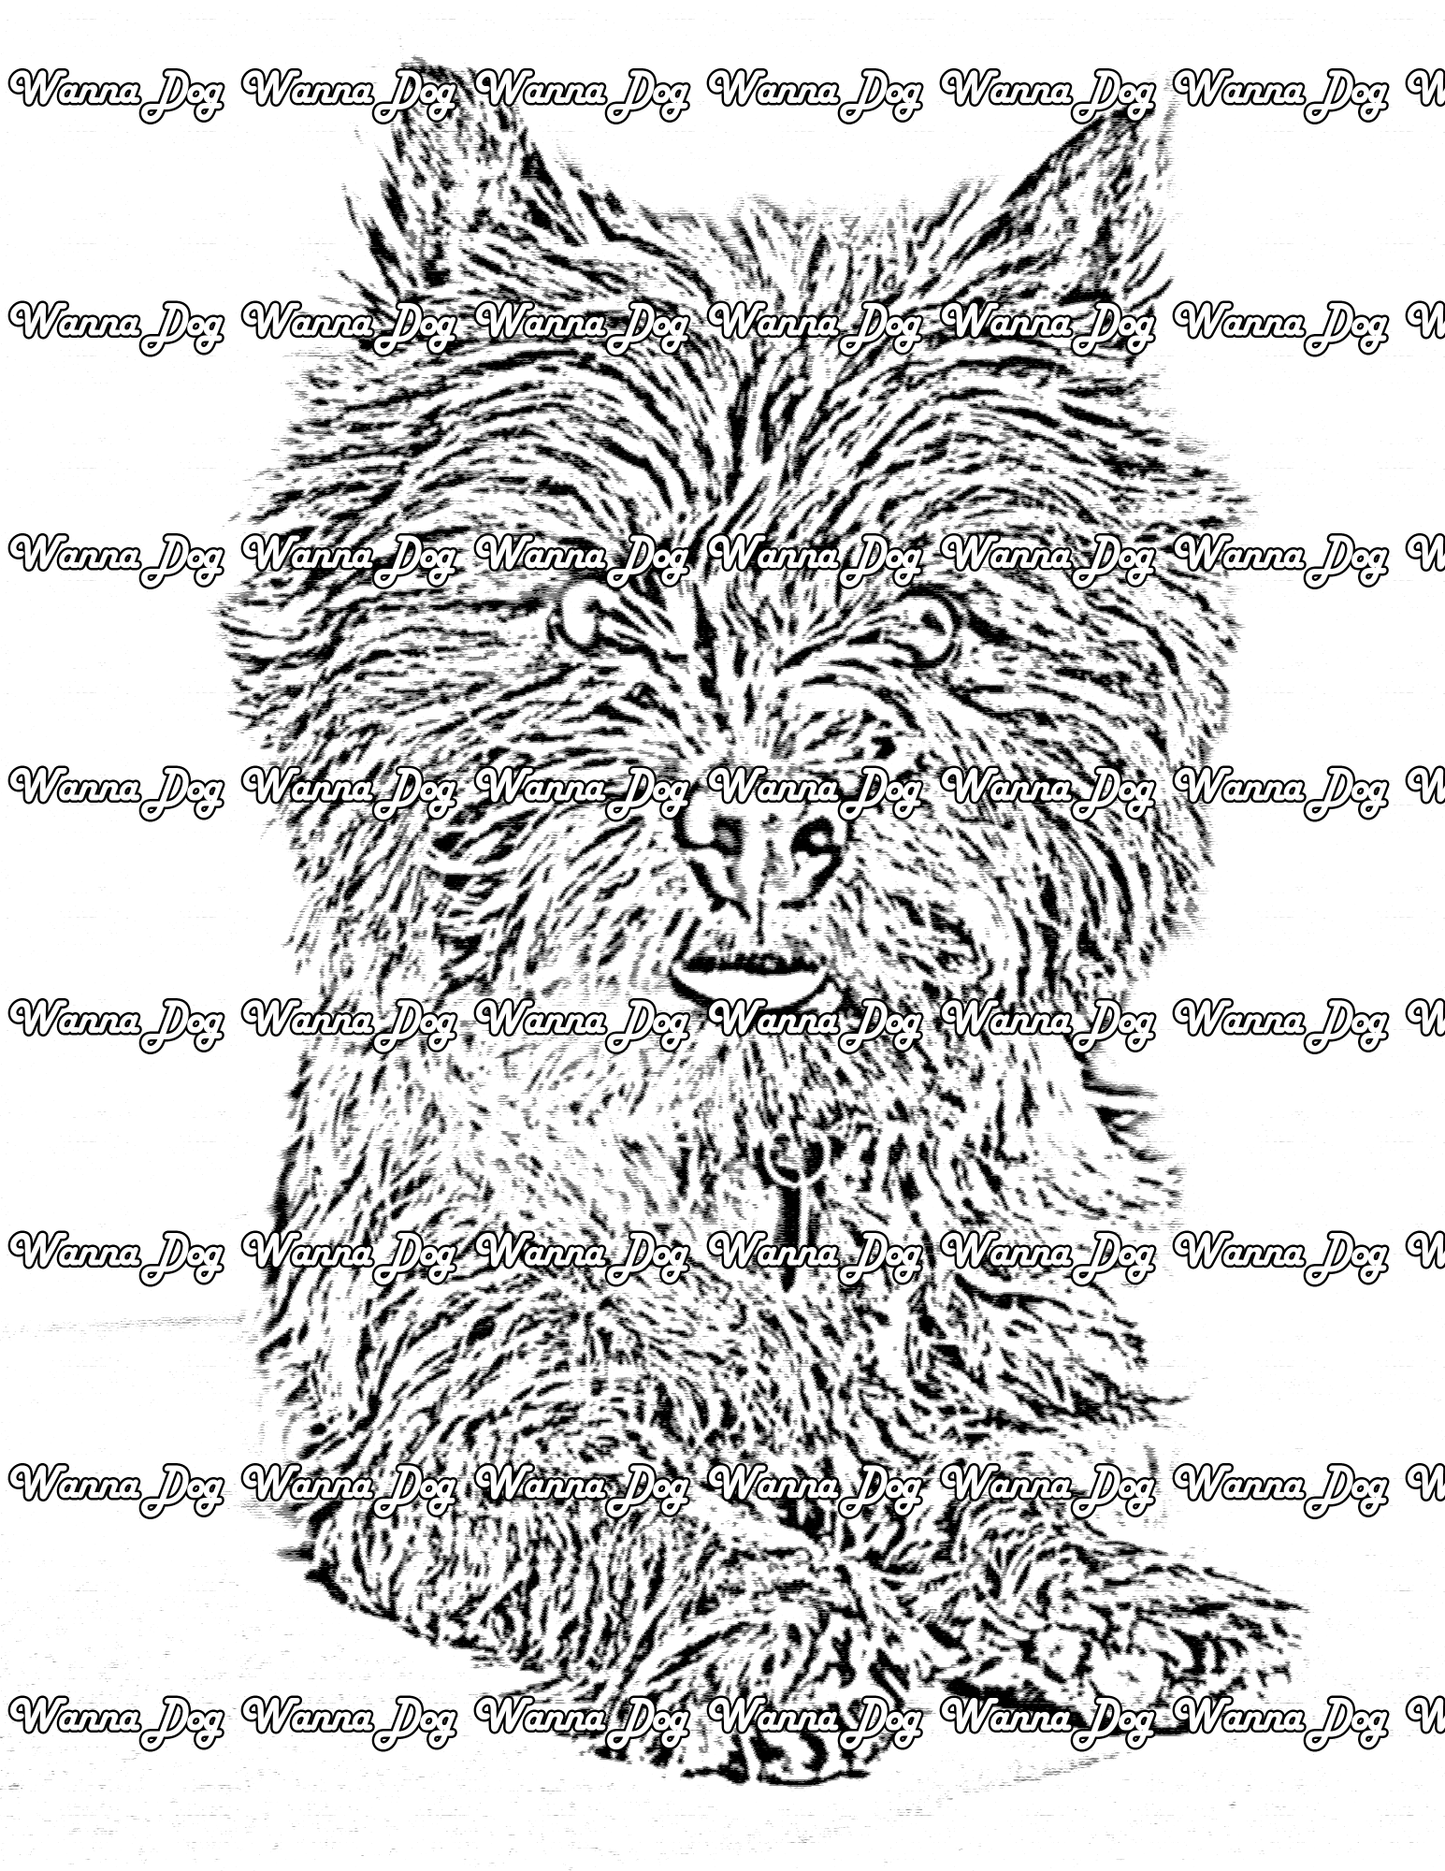 Cairn Terrier Coloring Page of a Cairn Terrier sitting, posing, with their tongue out